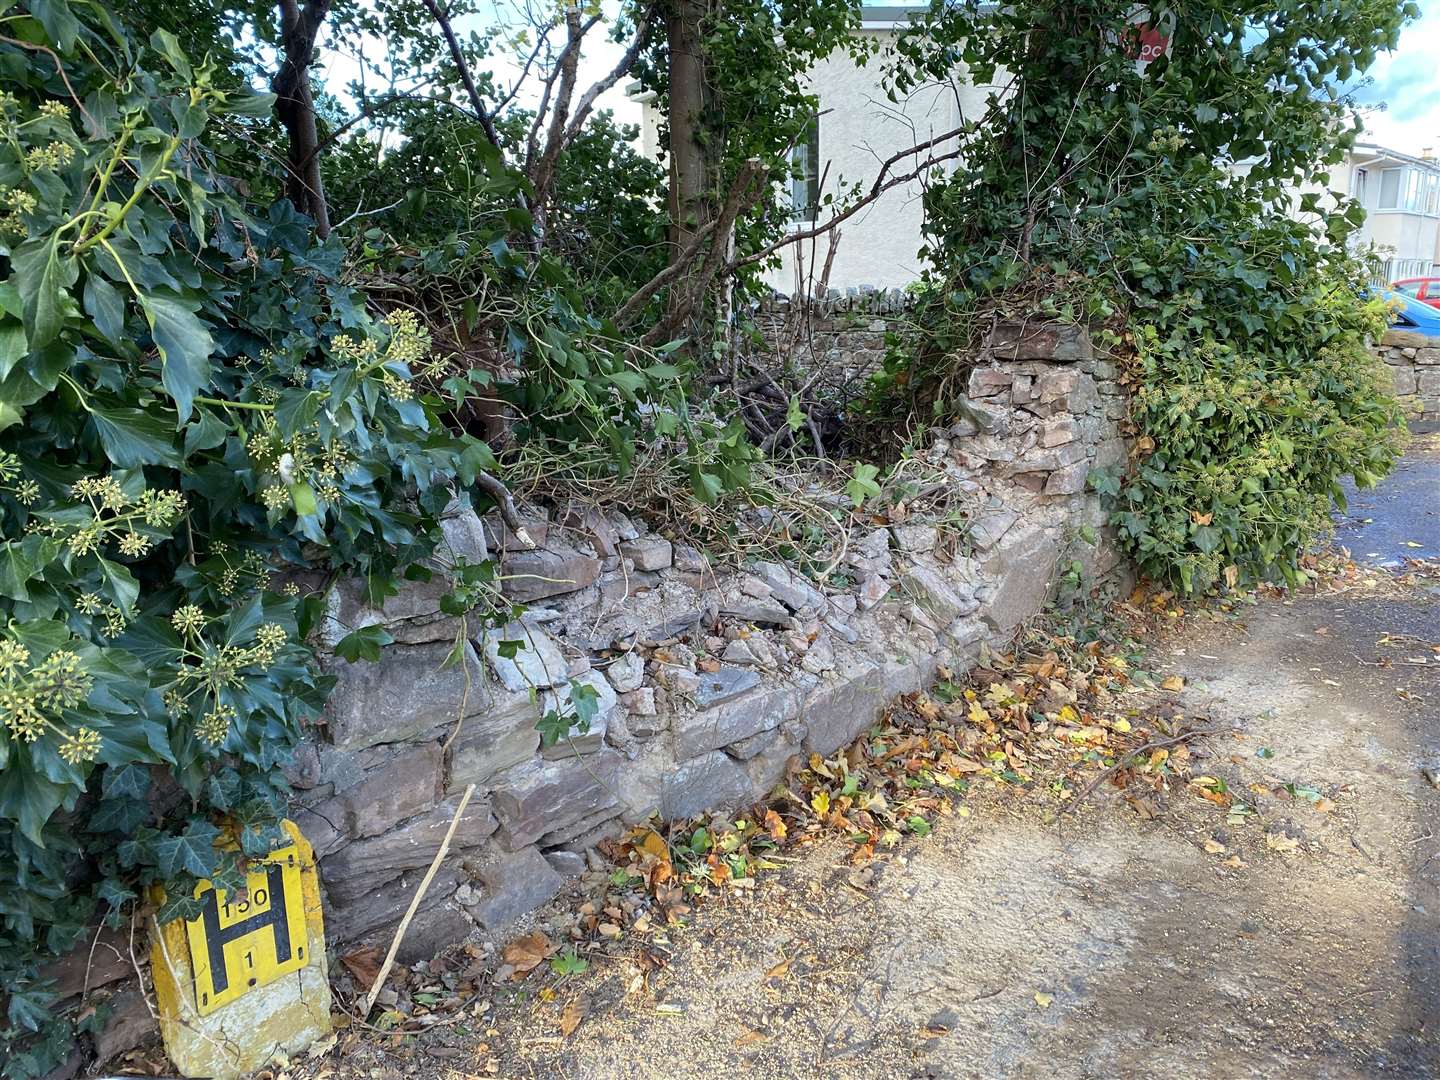 The damage to the wall caused by the fallen tree.